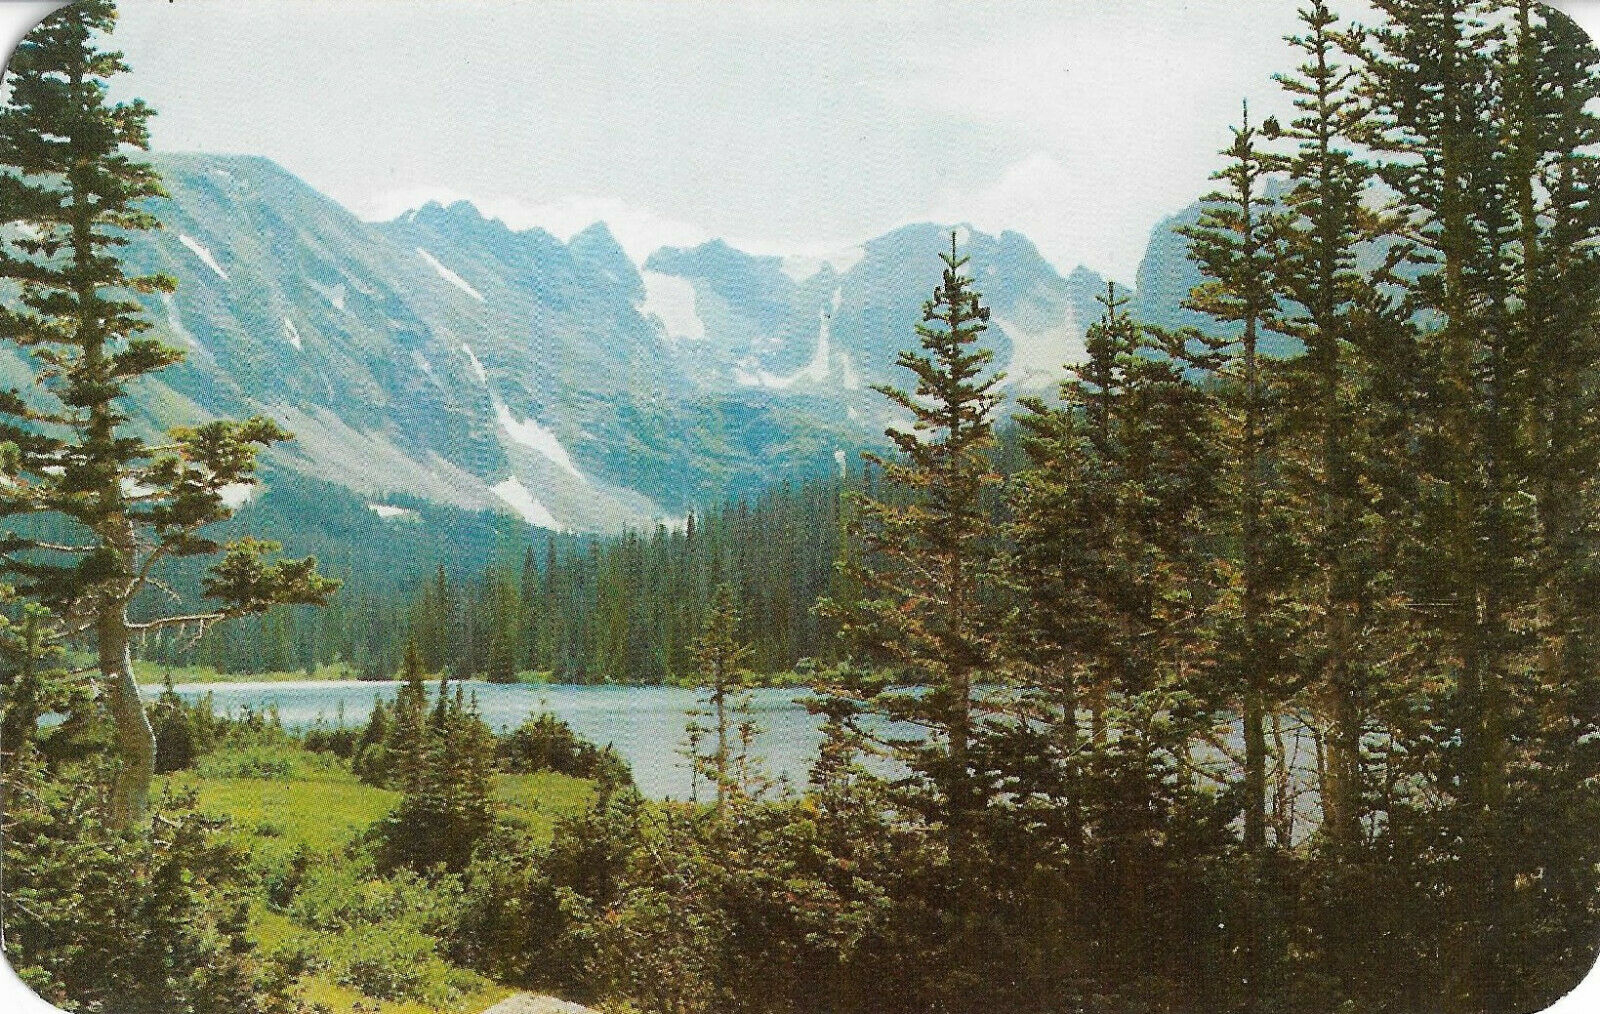 House Clearance - Colorado-Long Lake and High peaks of the Arapahoe district near Ward - 1958